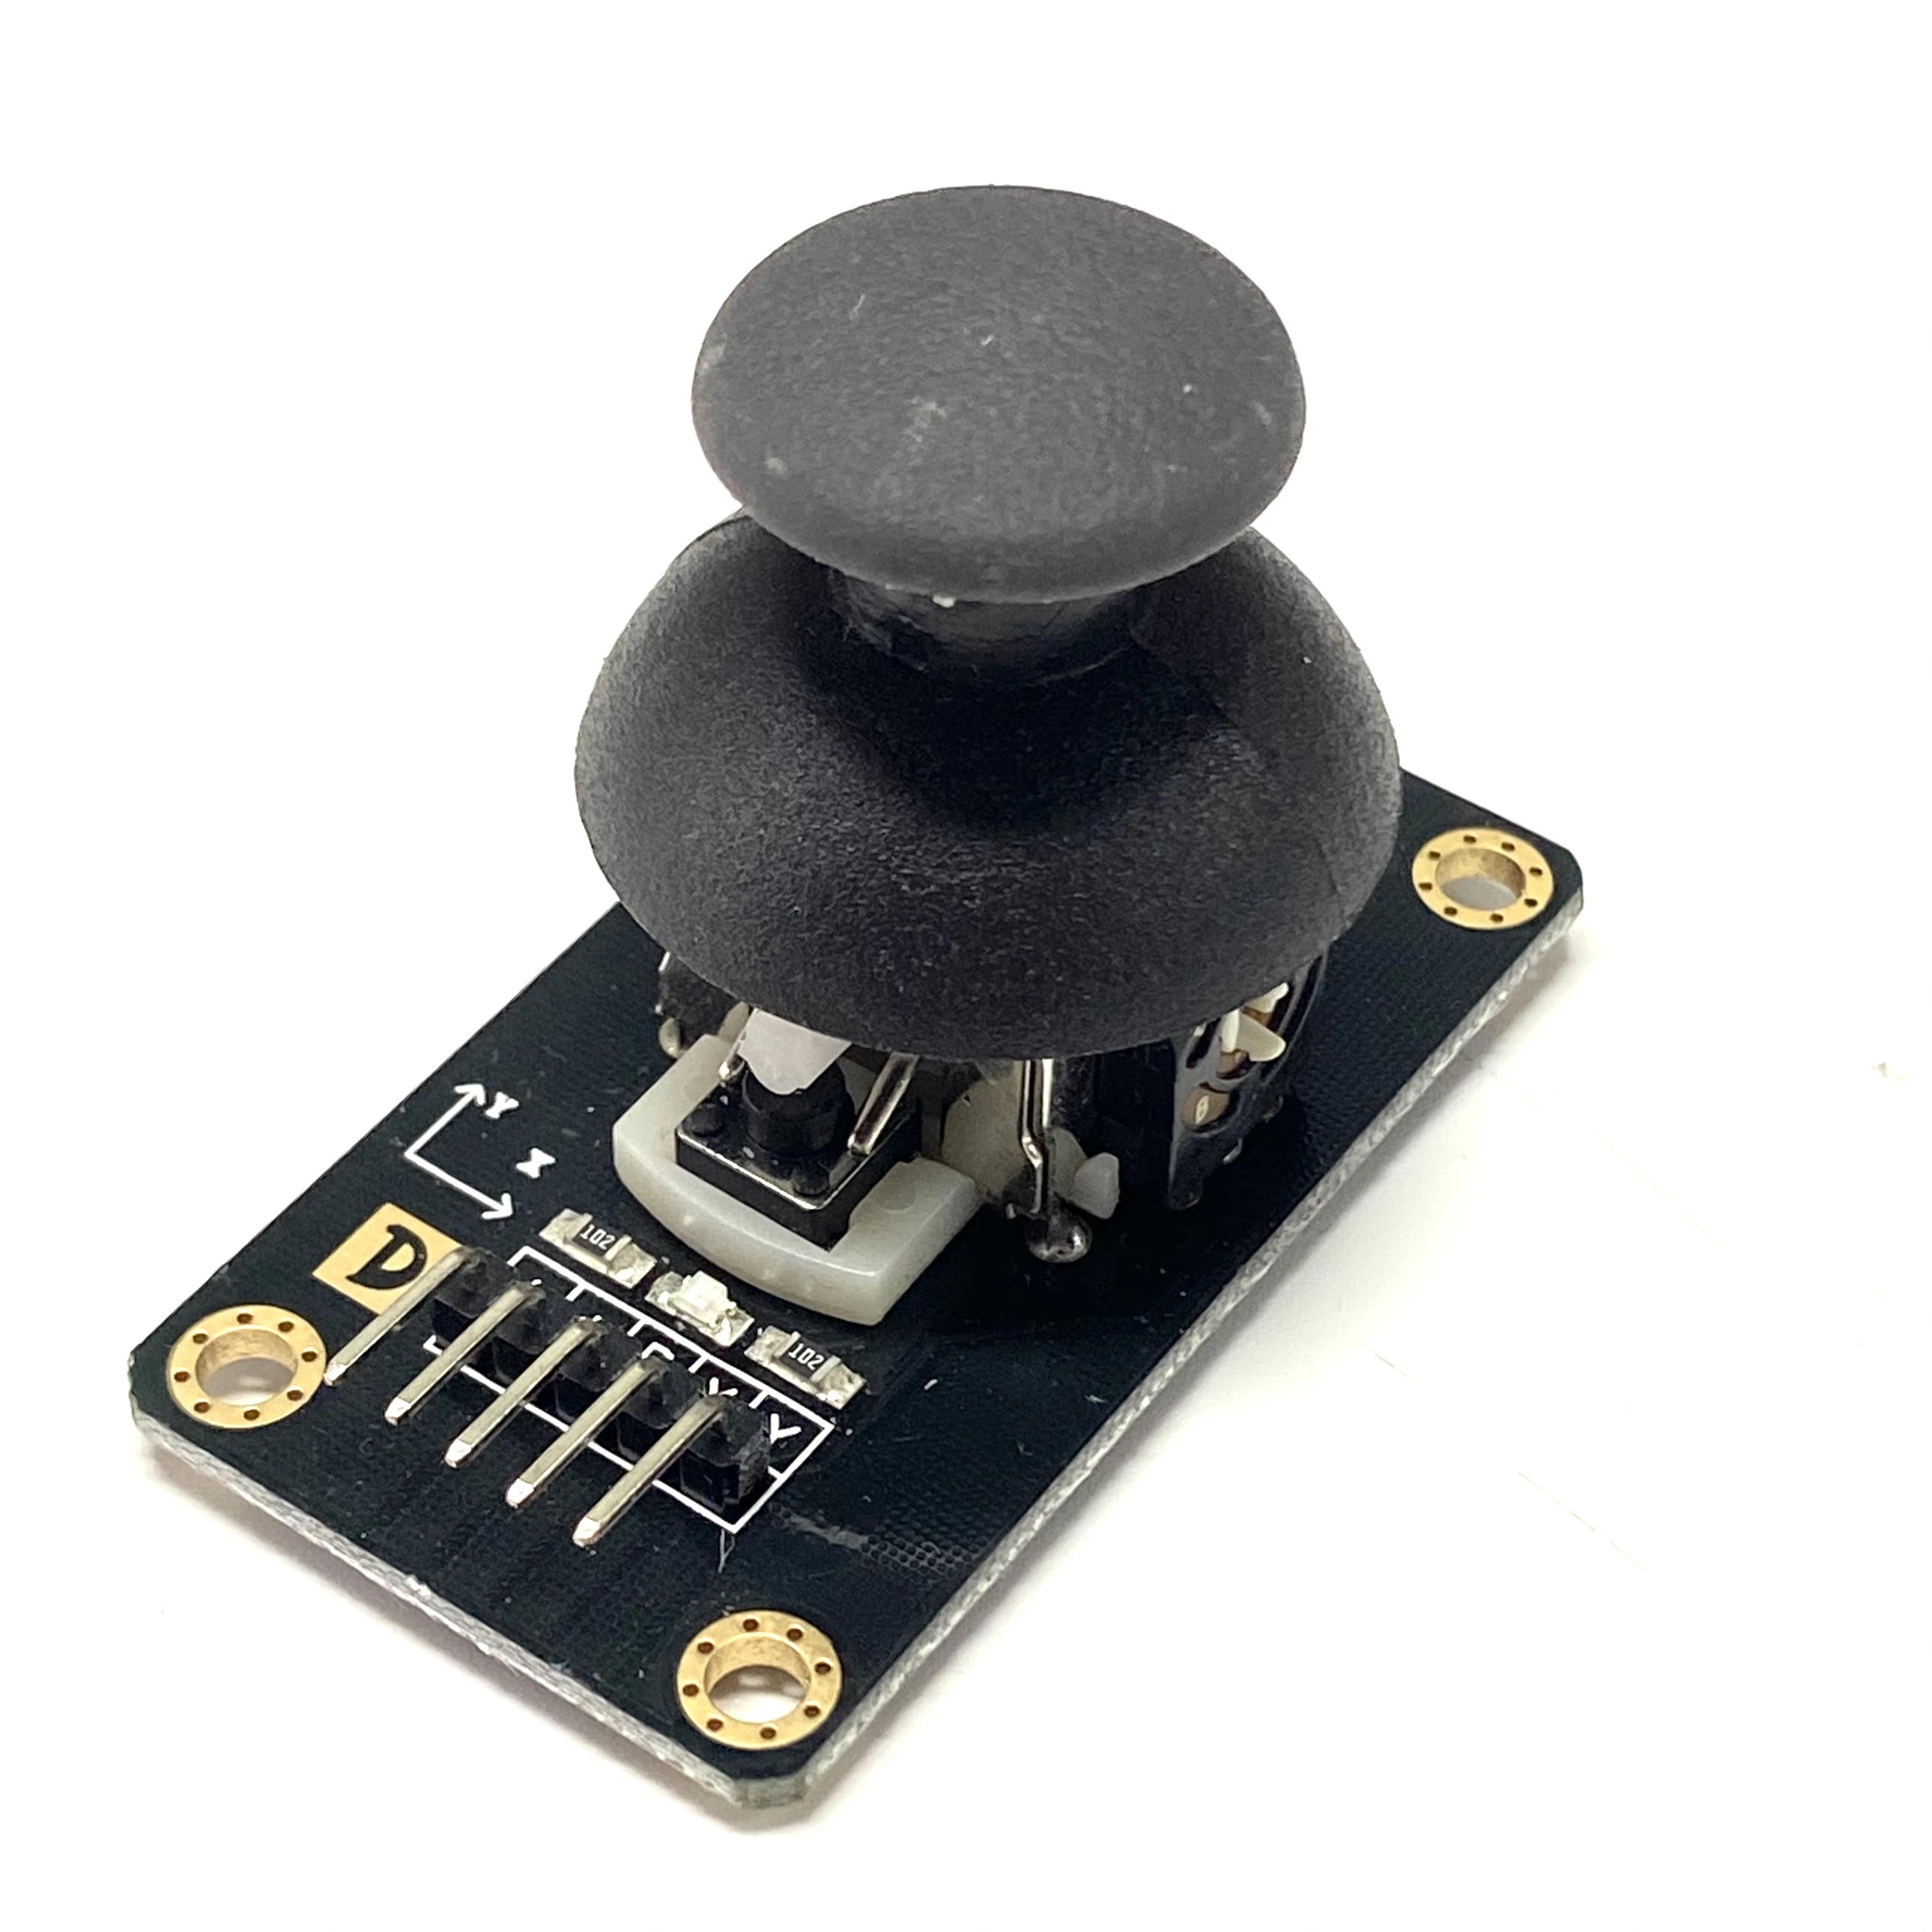 Applicable to R3 PS2 Game Rocker Sensor Module Game Console Accessories - £7.29 GBP